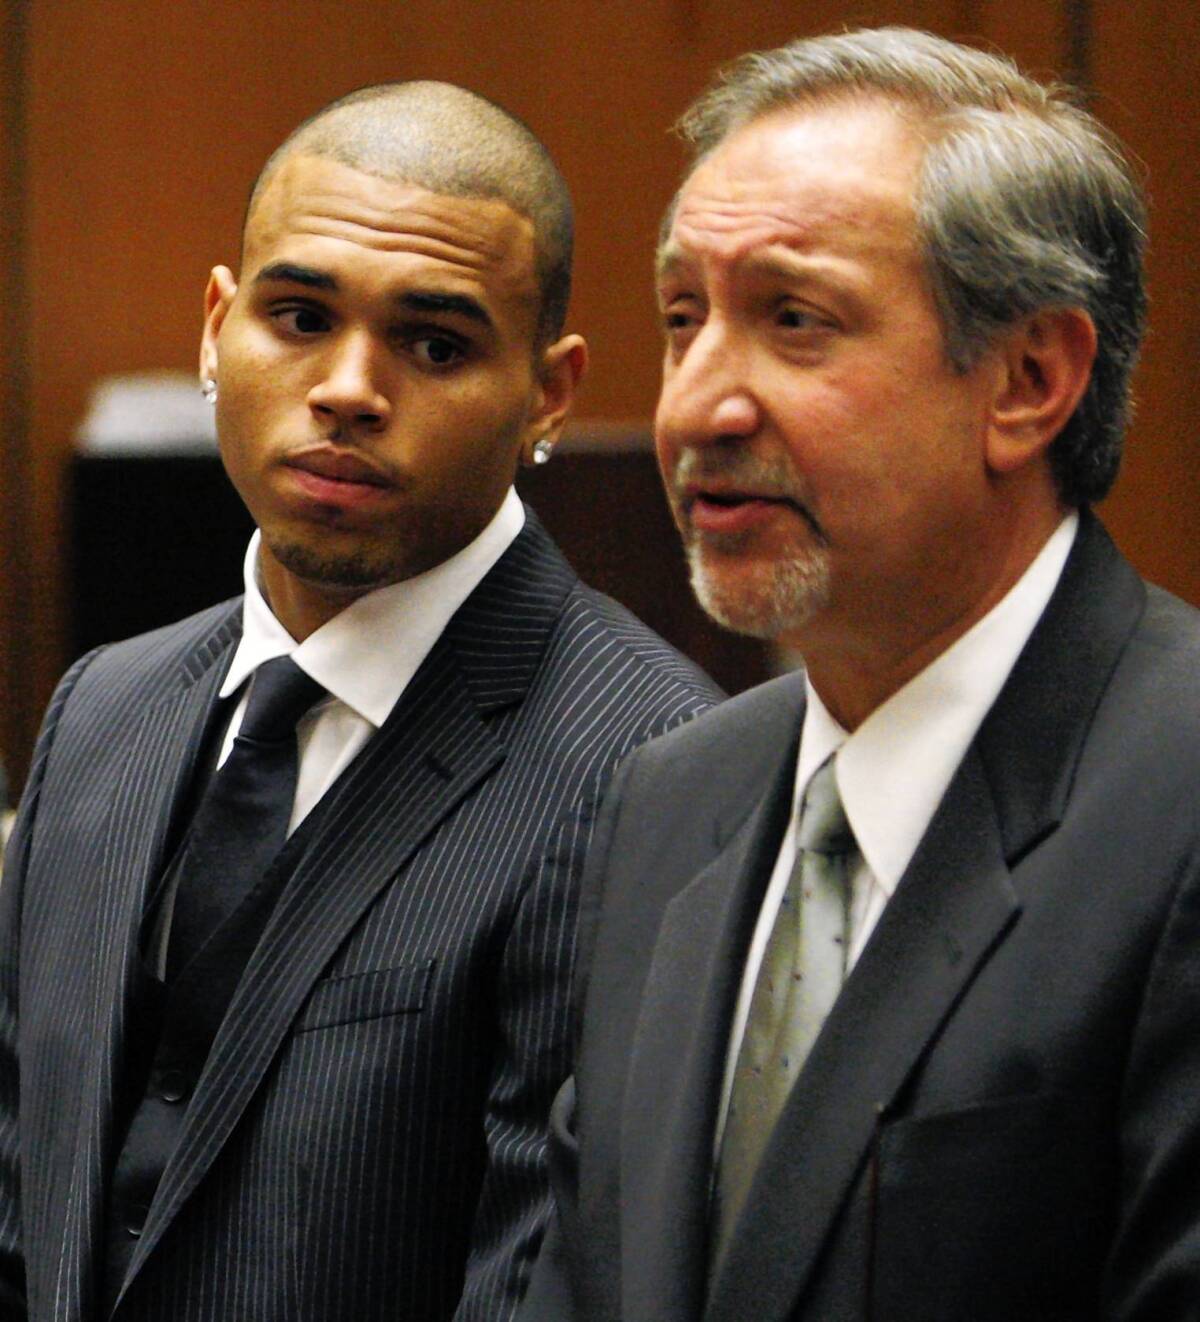 Chris Brown, left, is shown with his attorney, Mark Geragos. The singer is required to perform 180 days of community labor in connection with a 2009 attack on then-girlfriend Rihanna.